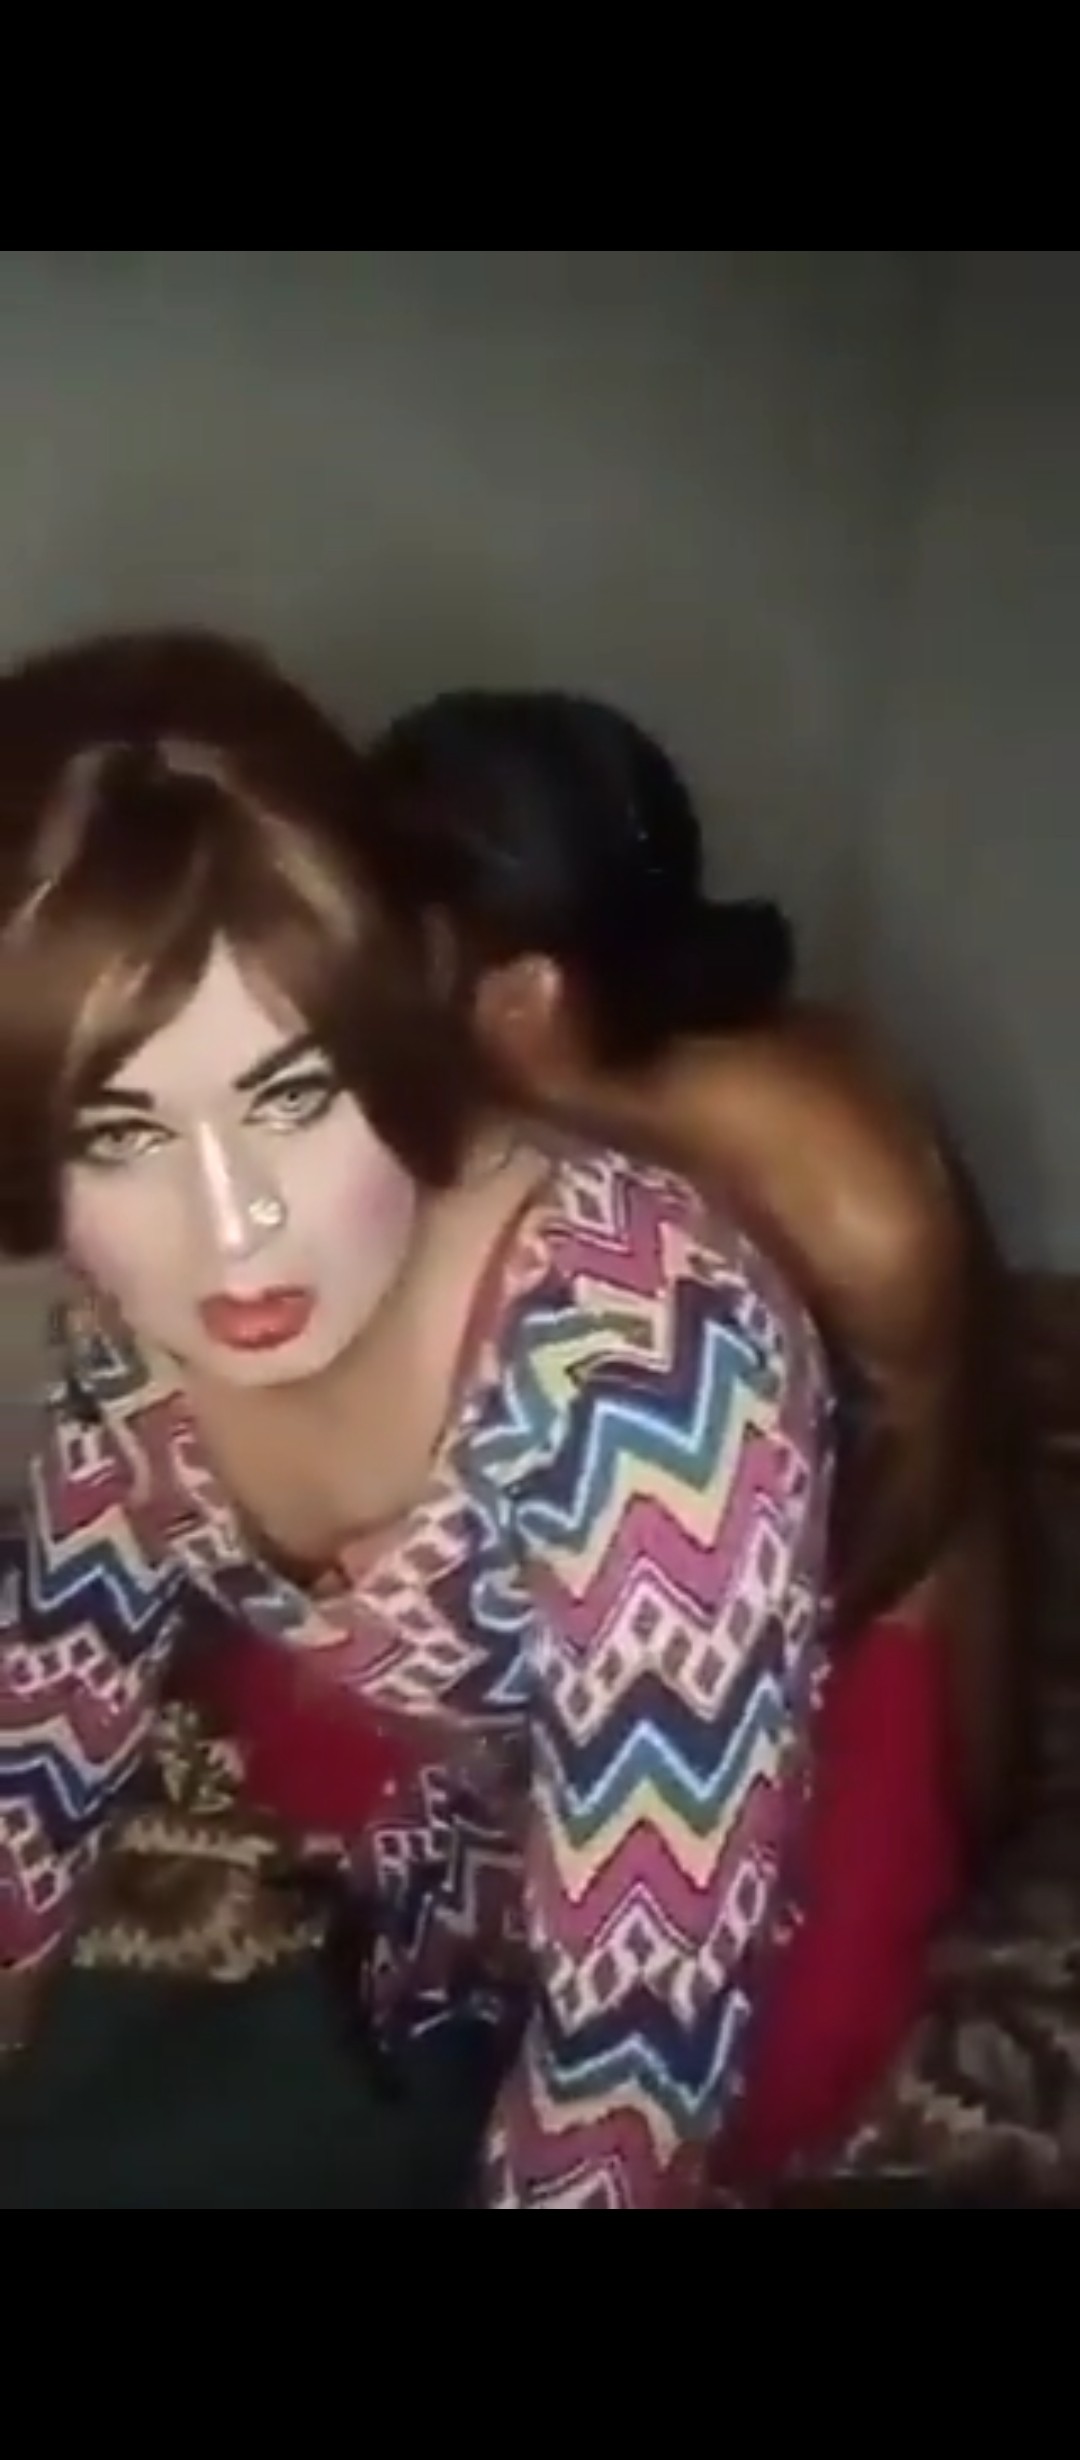 Paki hijra getting fucked - Trans Porn Videos Section - DropMMS Unblock